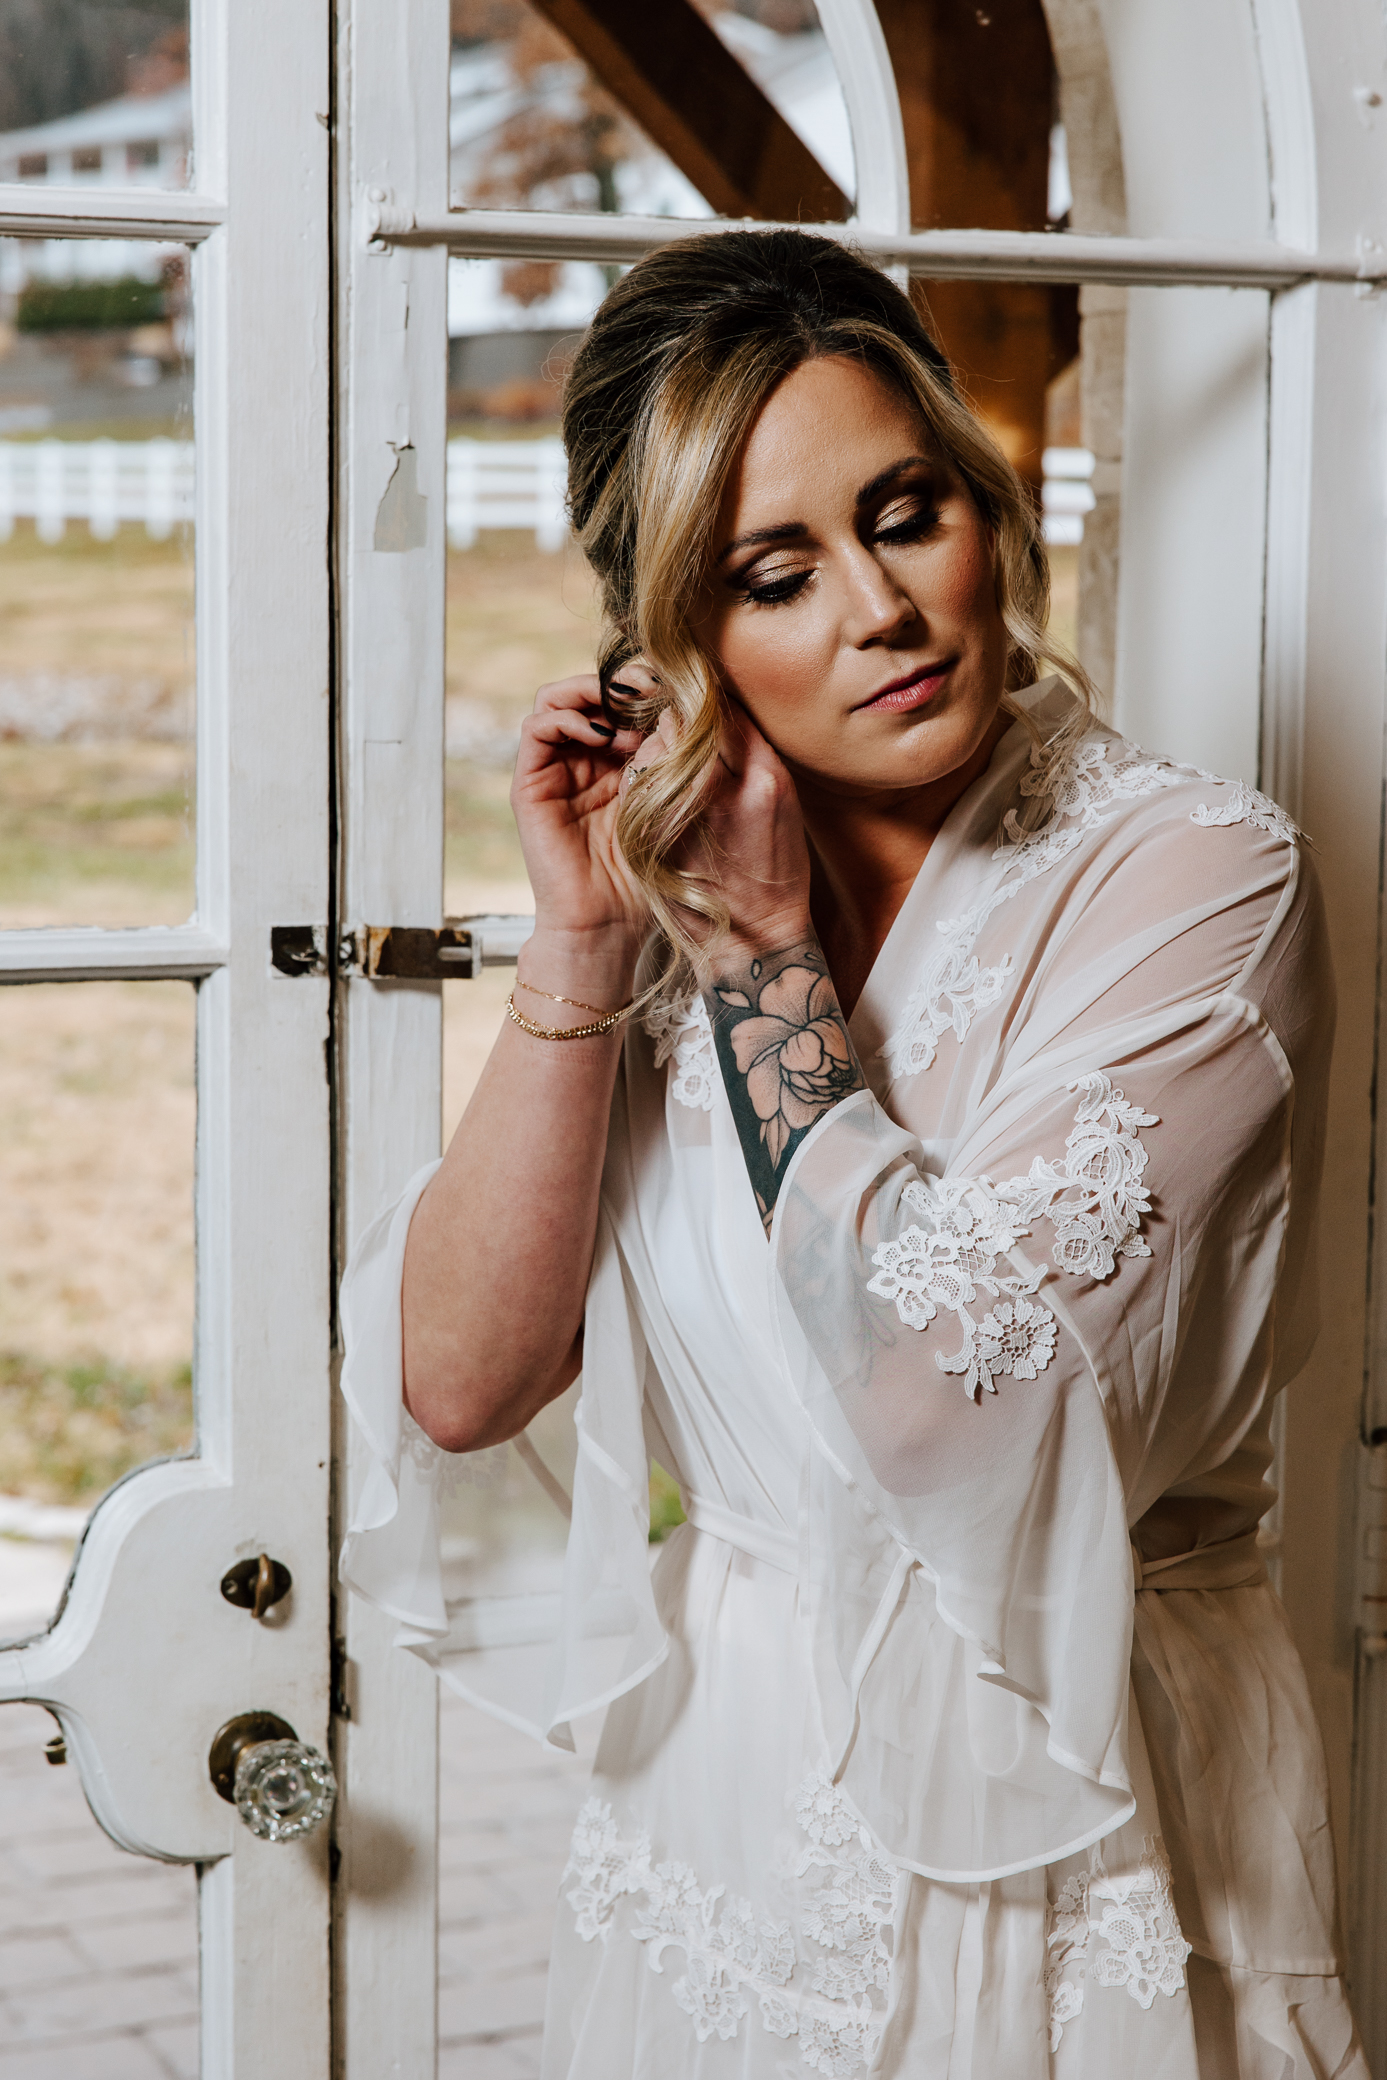 A tattooed bride wears a white robe while she puts her earrings on in the doorway of the bridal suite at Knotting Hills in Pevely, Missouri.